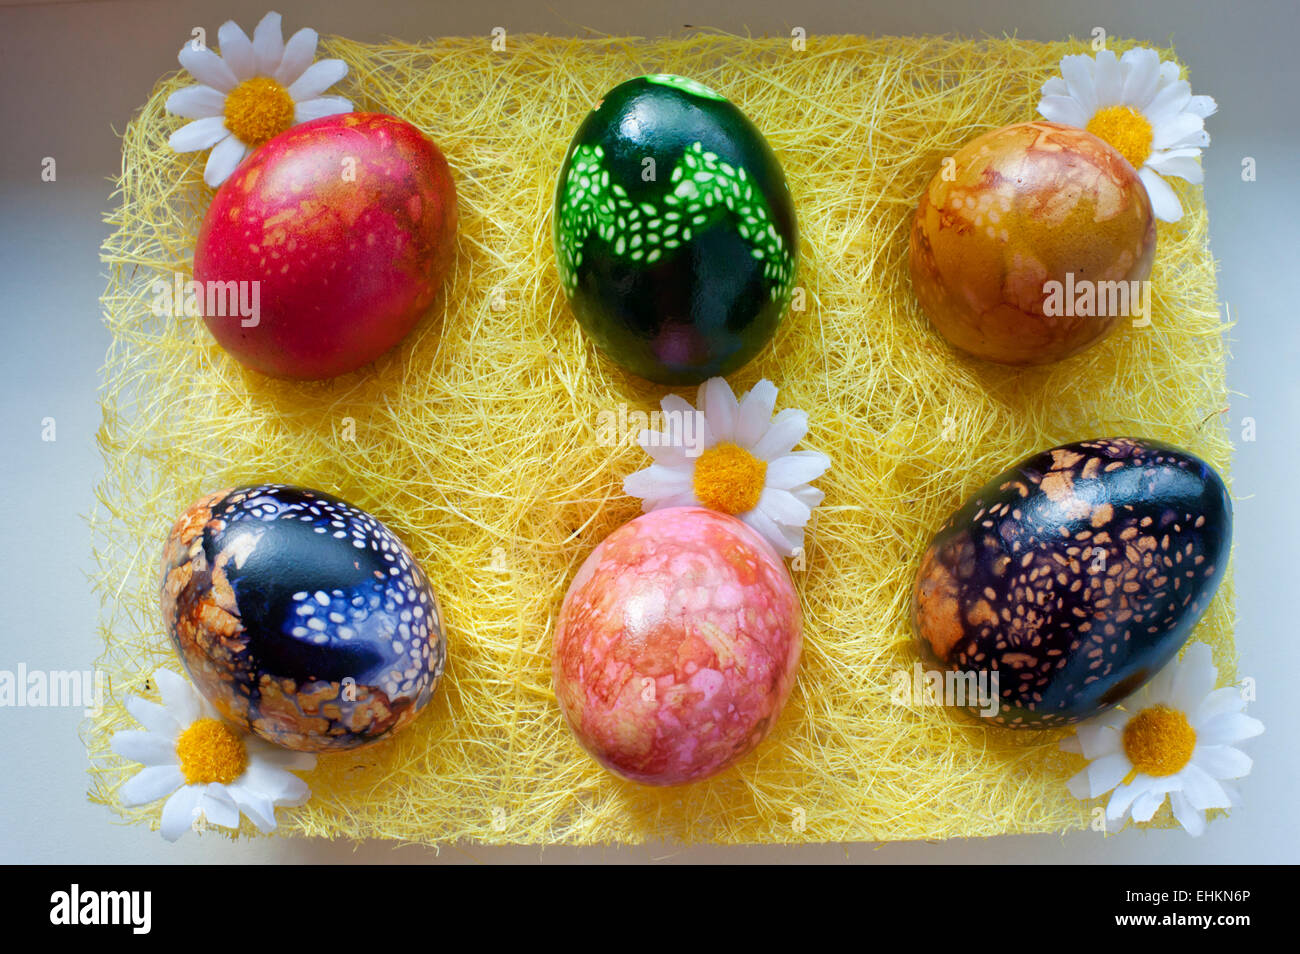 Easter eggs or Paschal eggs, hand decorated by boiling in dye, with onion skins and linseed. Stock Photo